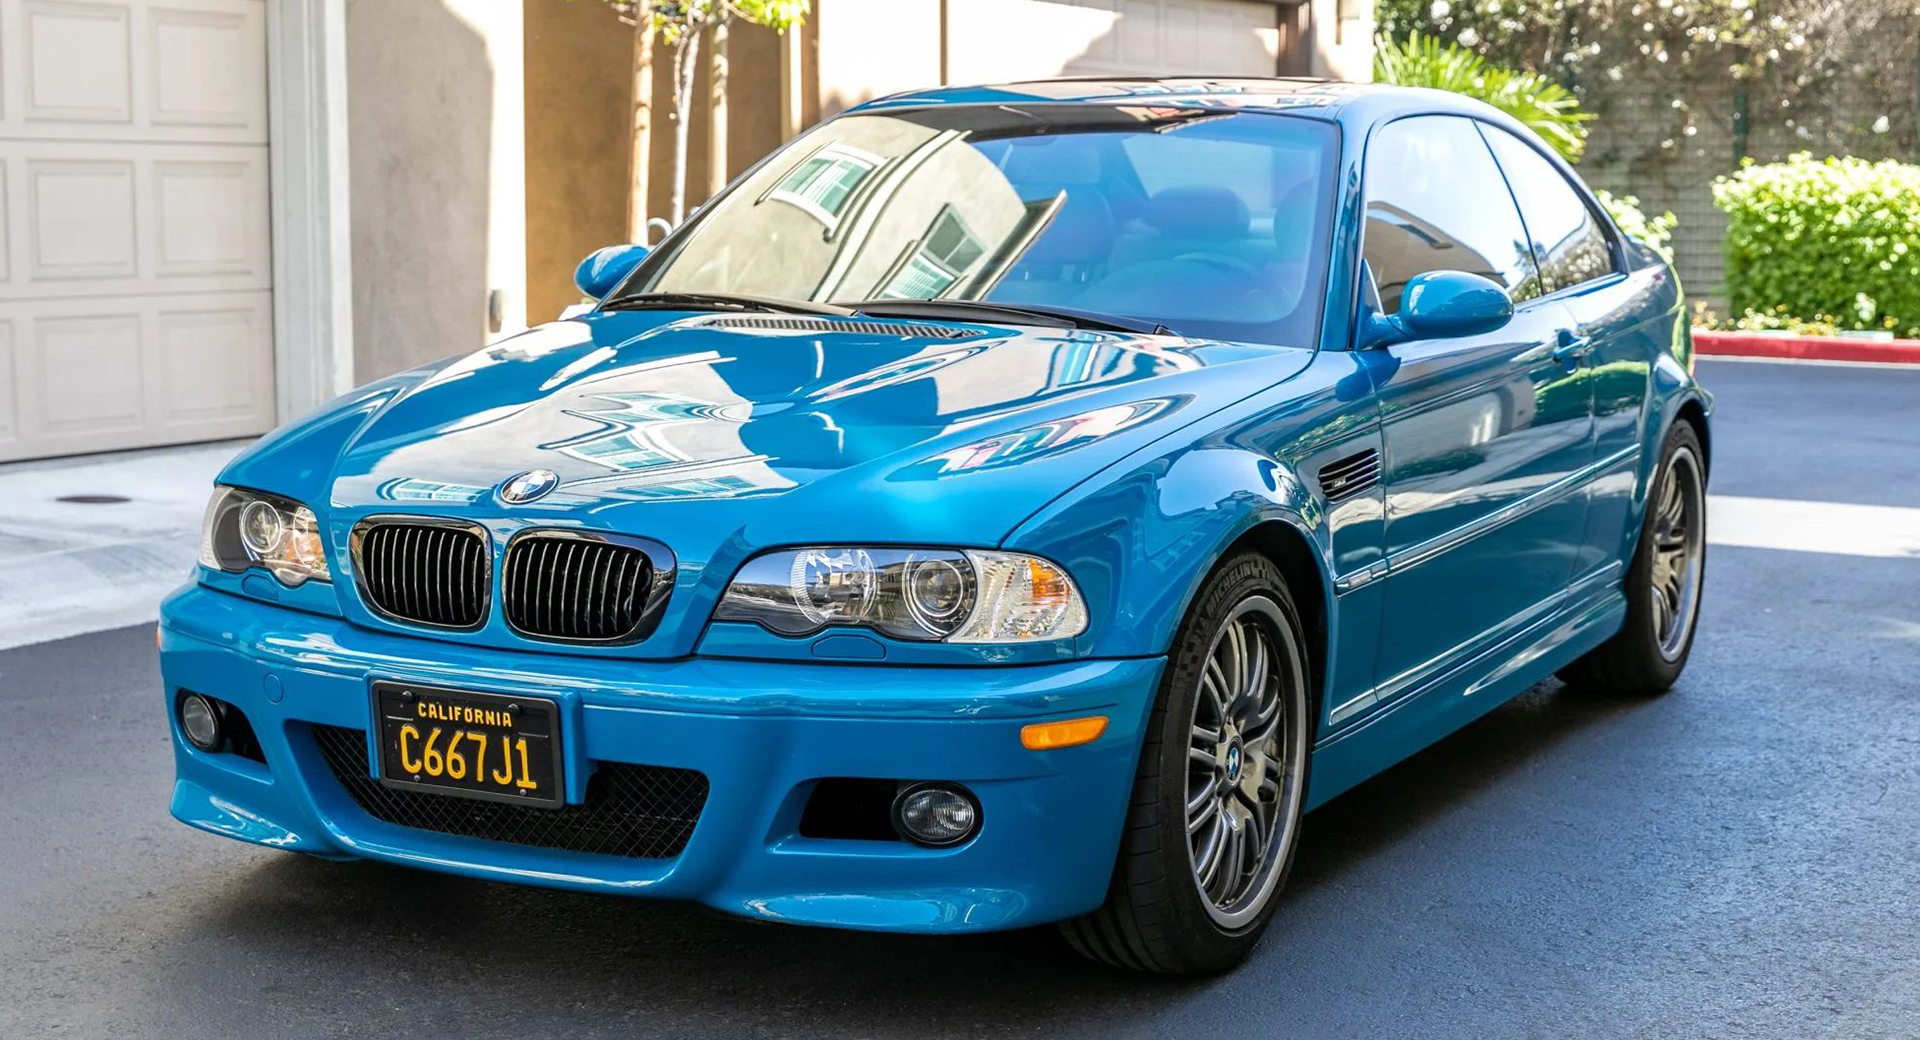 Have You Ever Seen A BMW E46 M3 That Looks As Nice As This